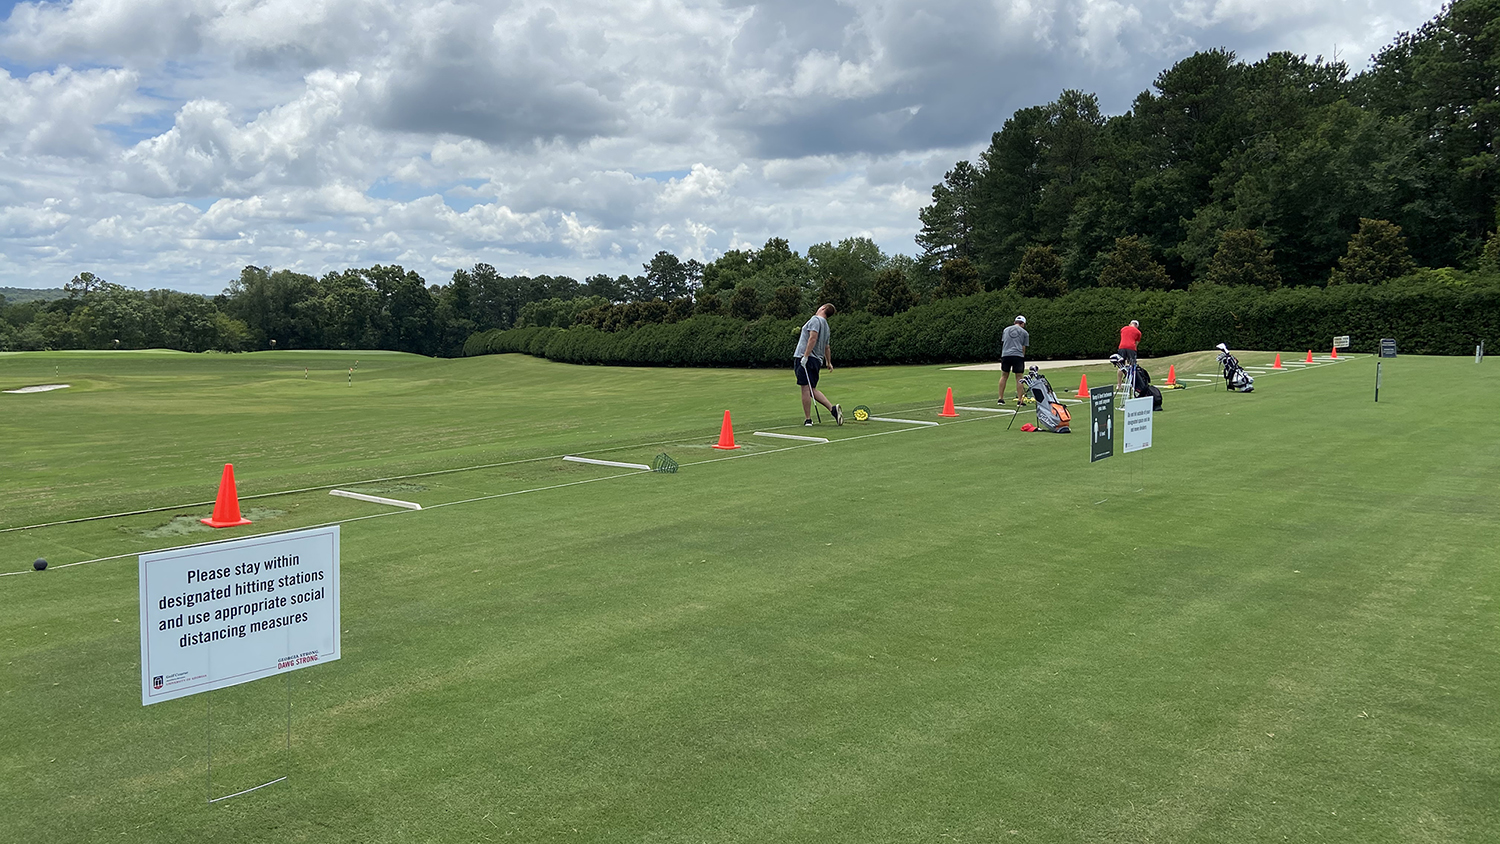 Image of golfers at the driving range, separated into every other station by orange cones. A sign reads "Please stay within designated hitting stations and use appropriate social distancing measures."